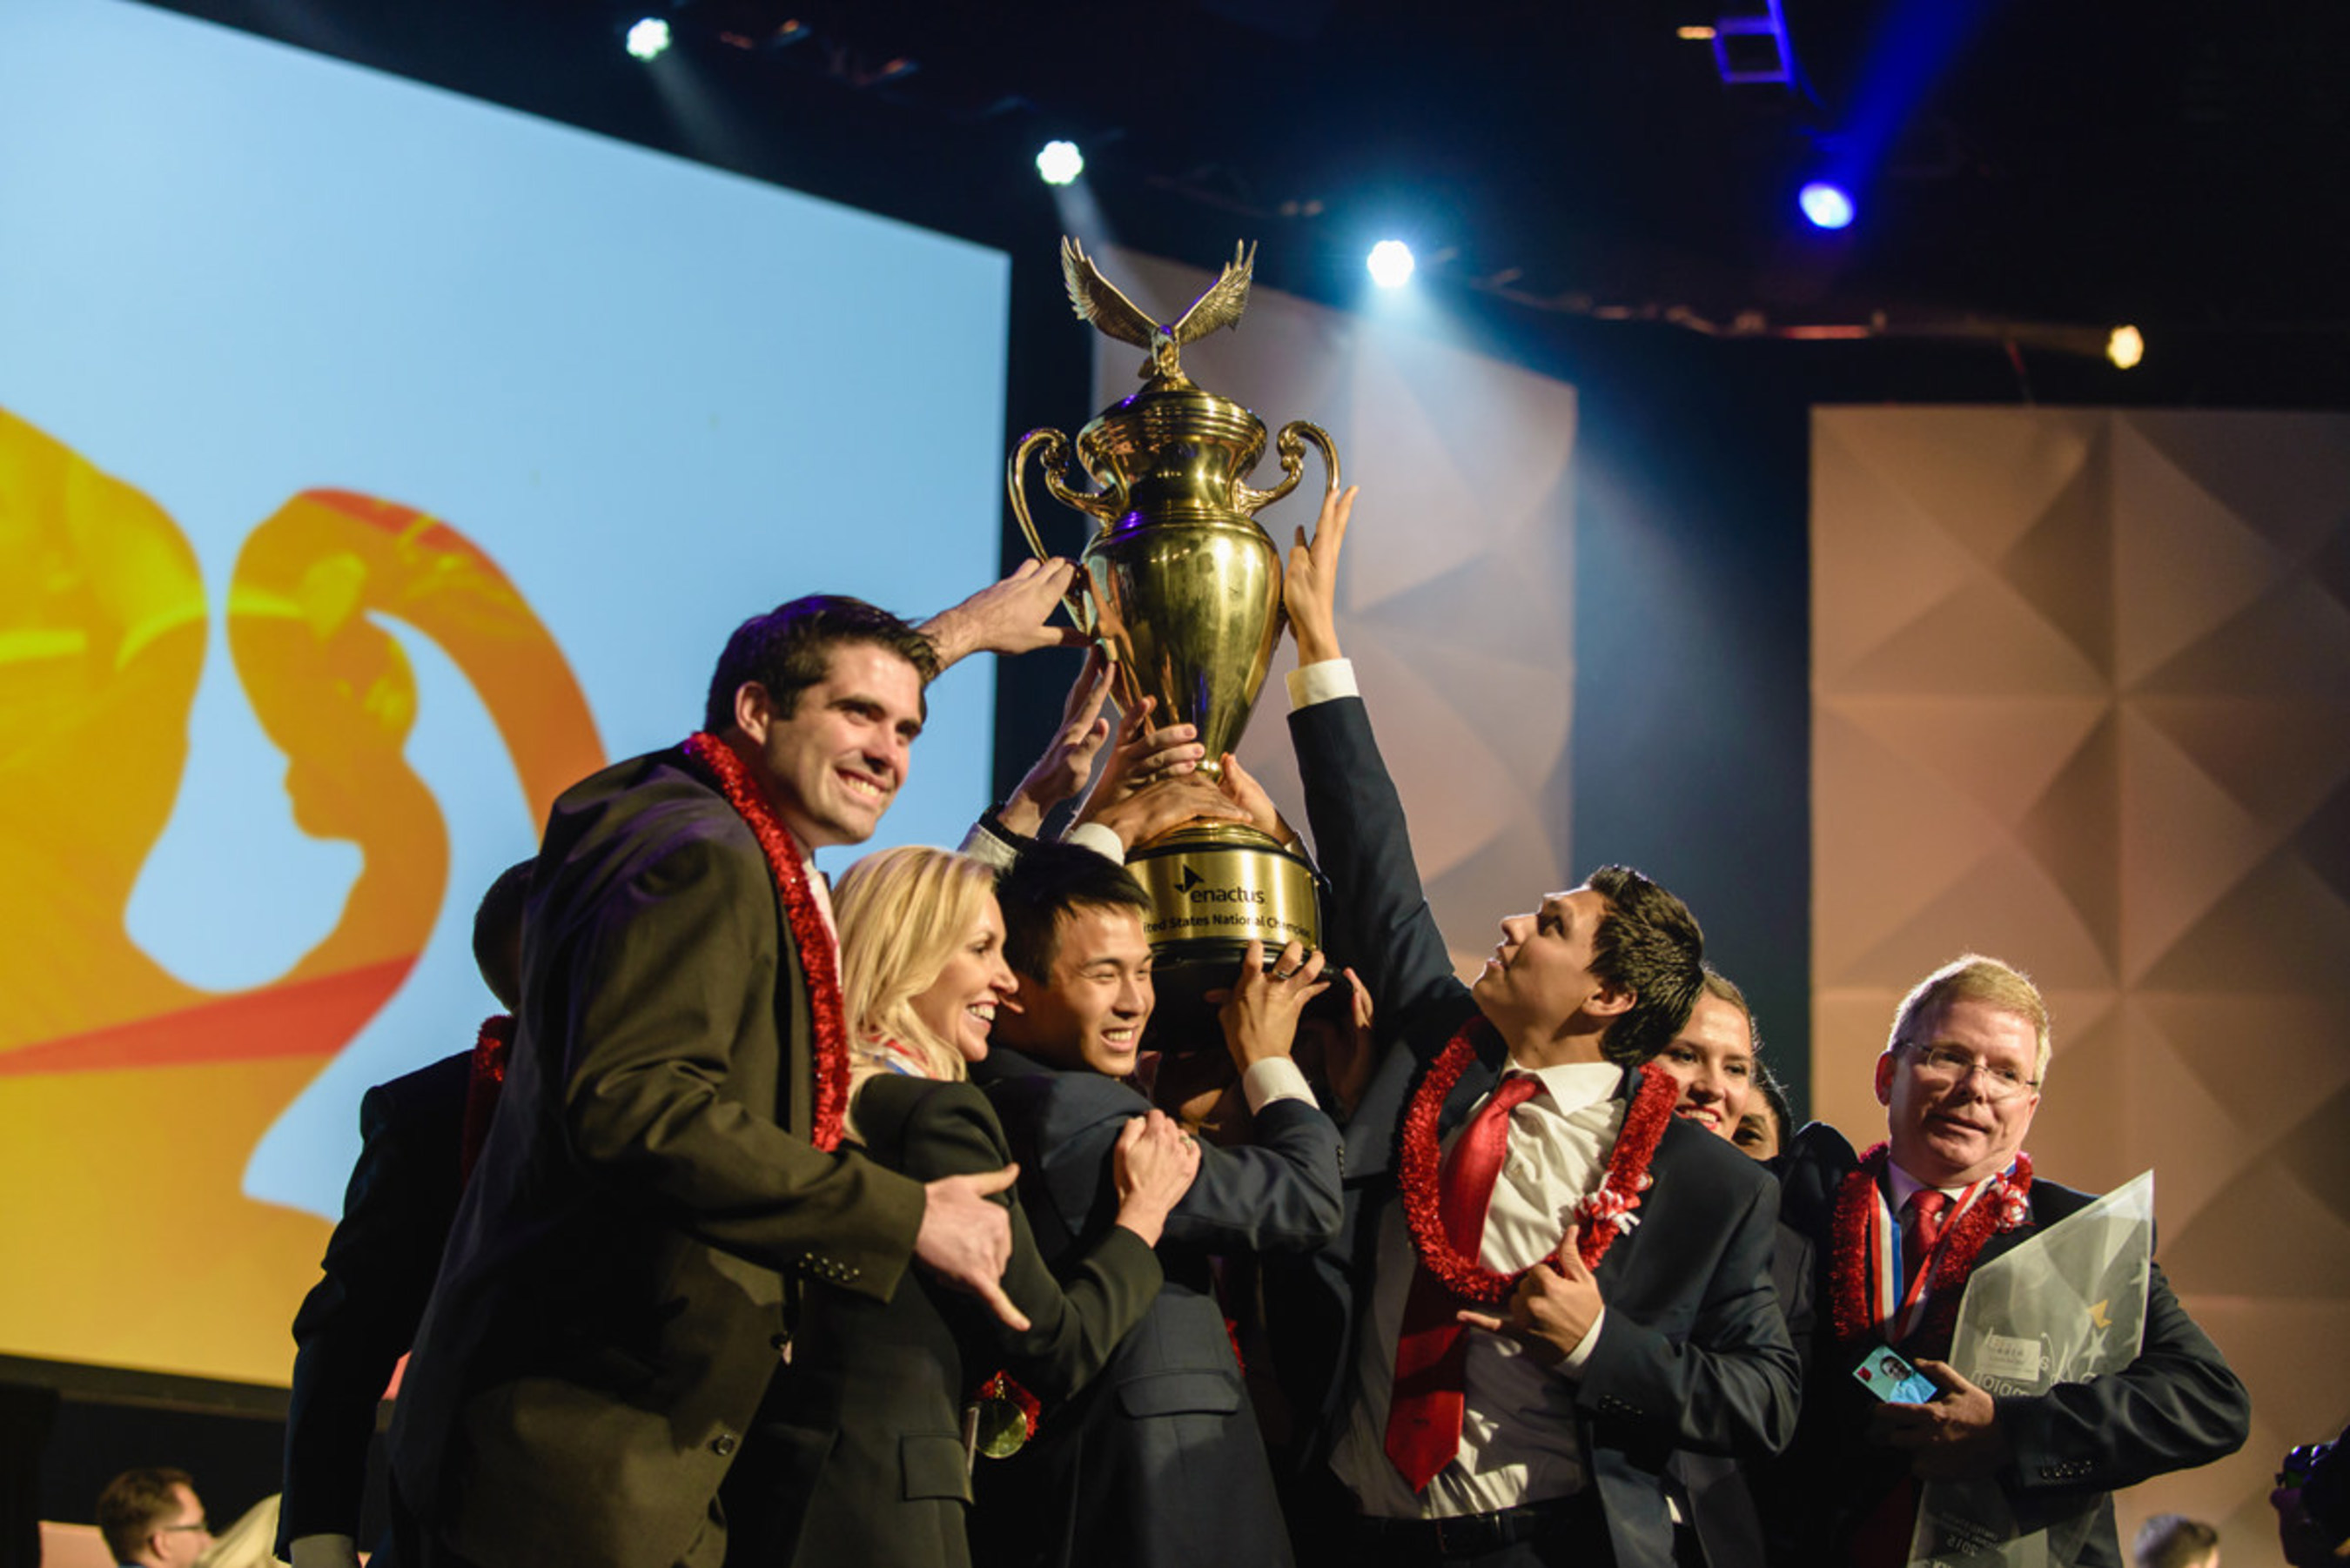 Brigham Young University-Hawaii (Laie, HI) named the 2015 Enactus United States National Champion